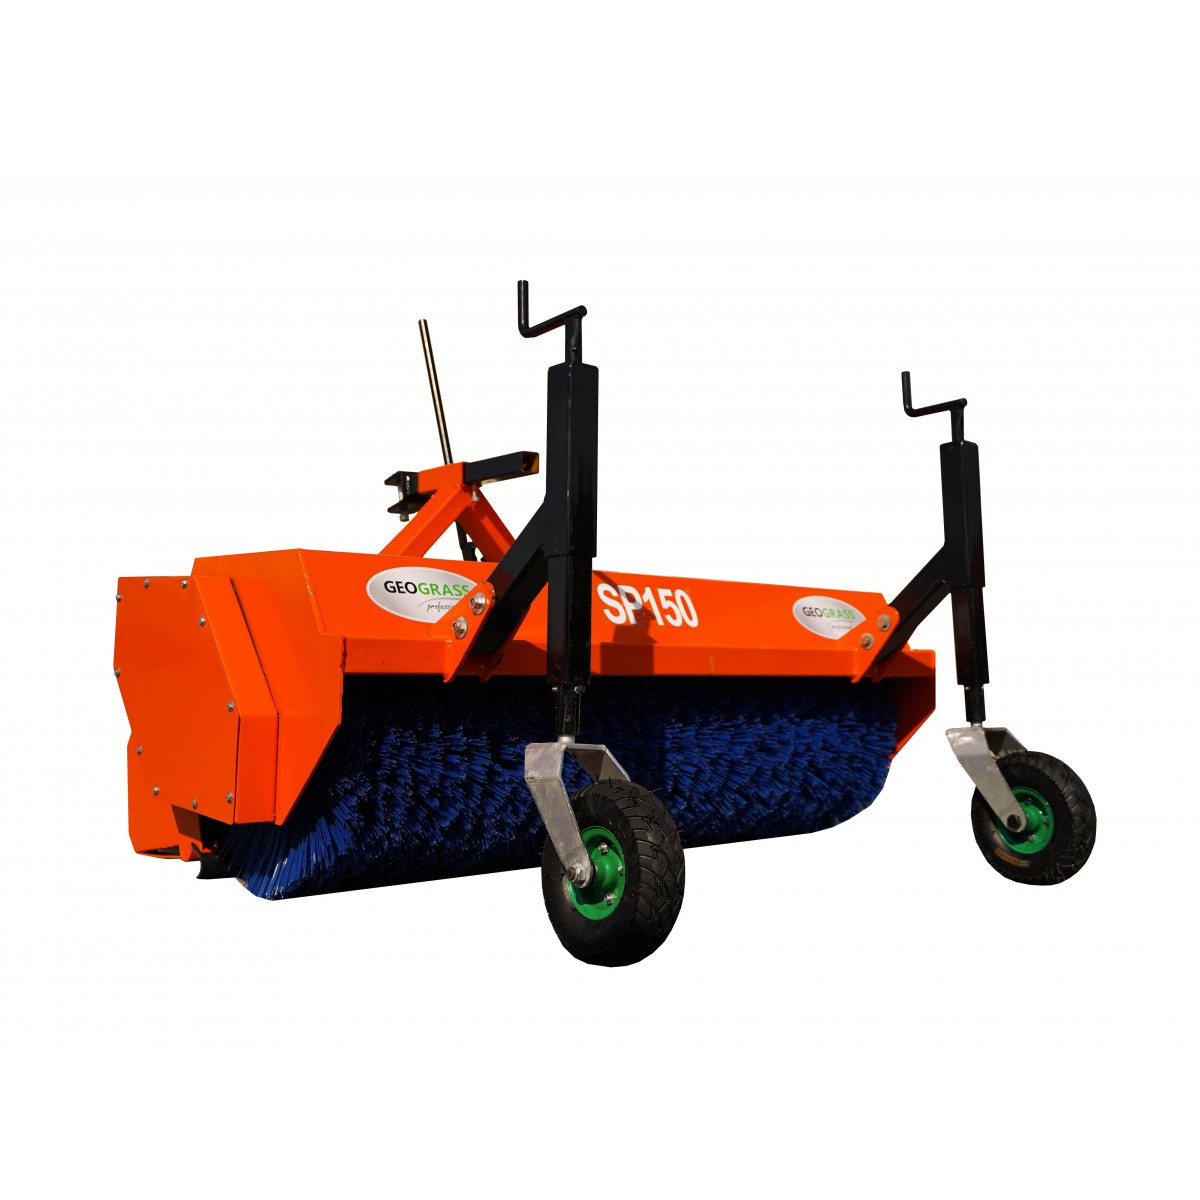 SP150 sweeper for Geograss tractor